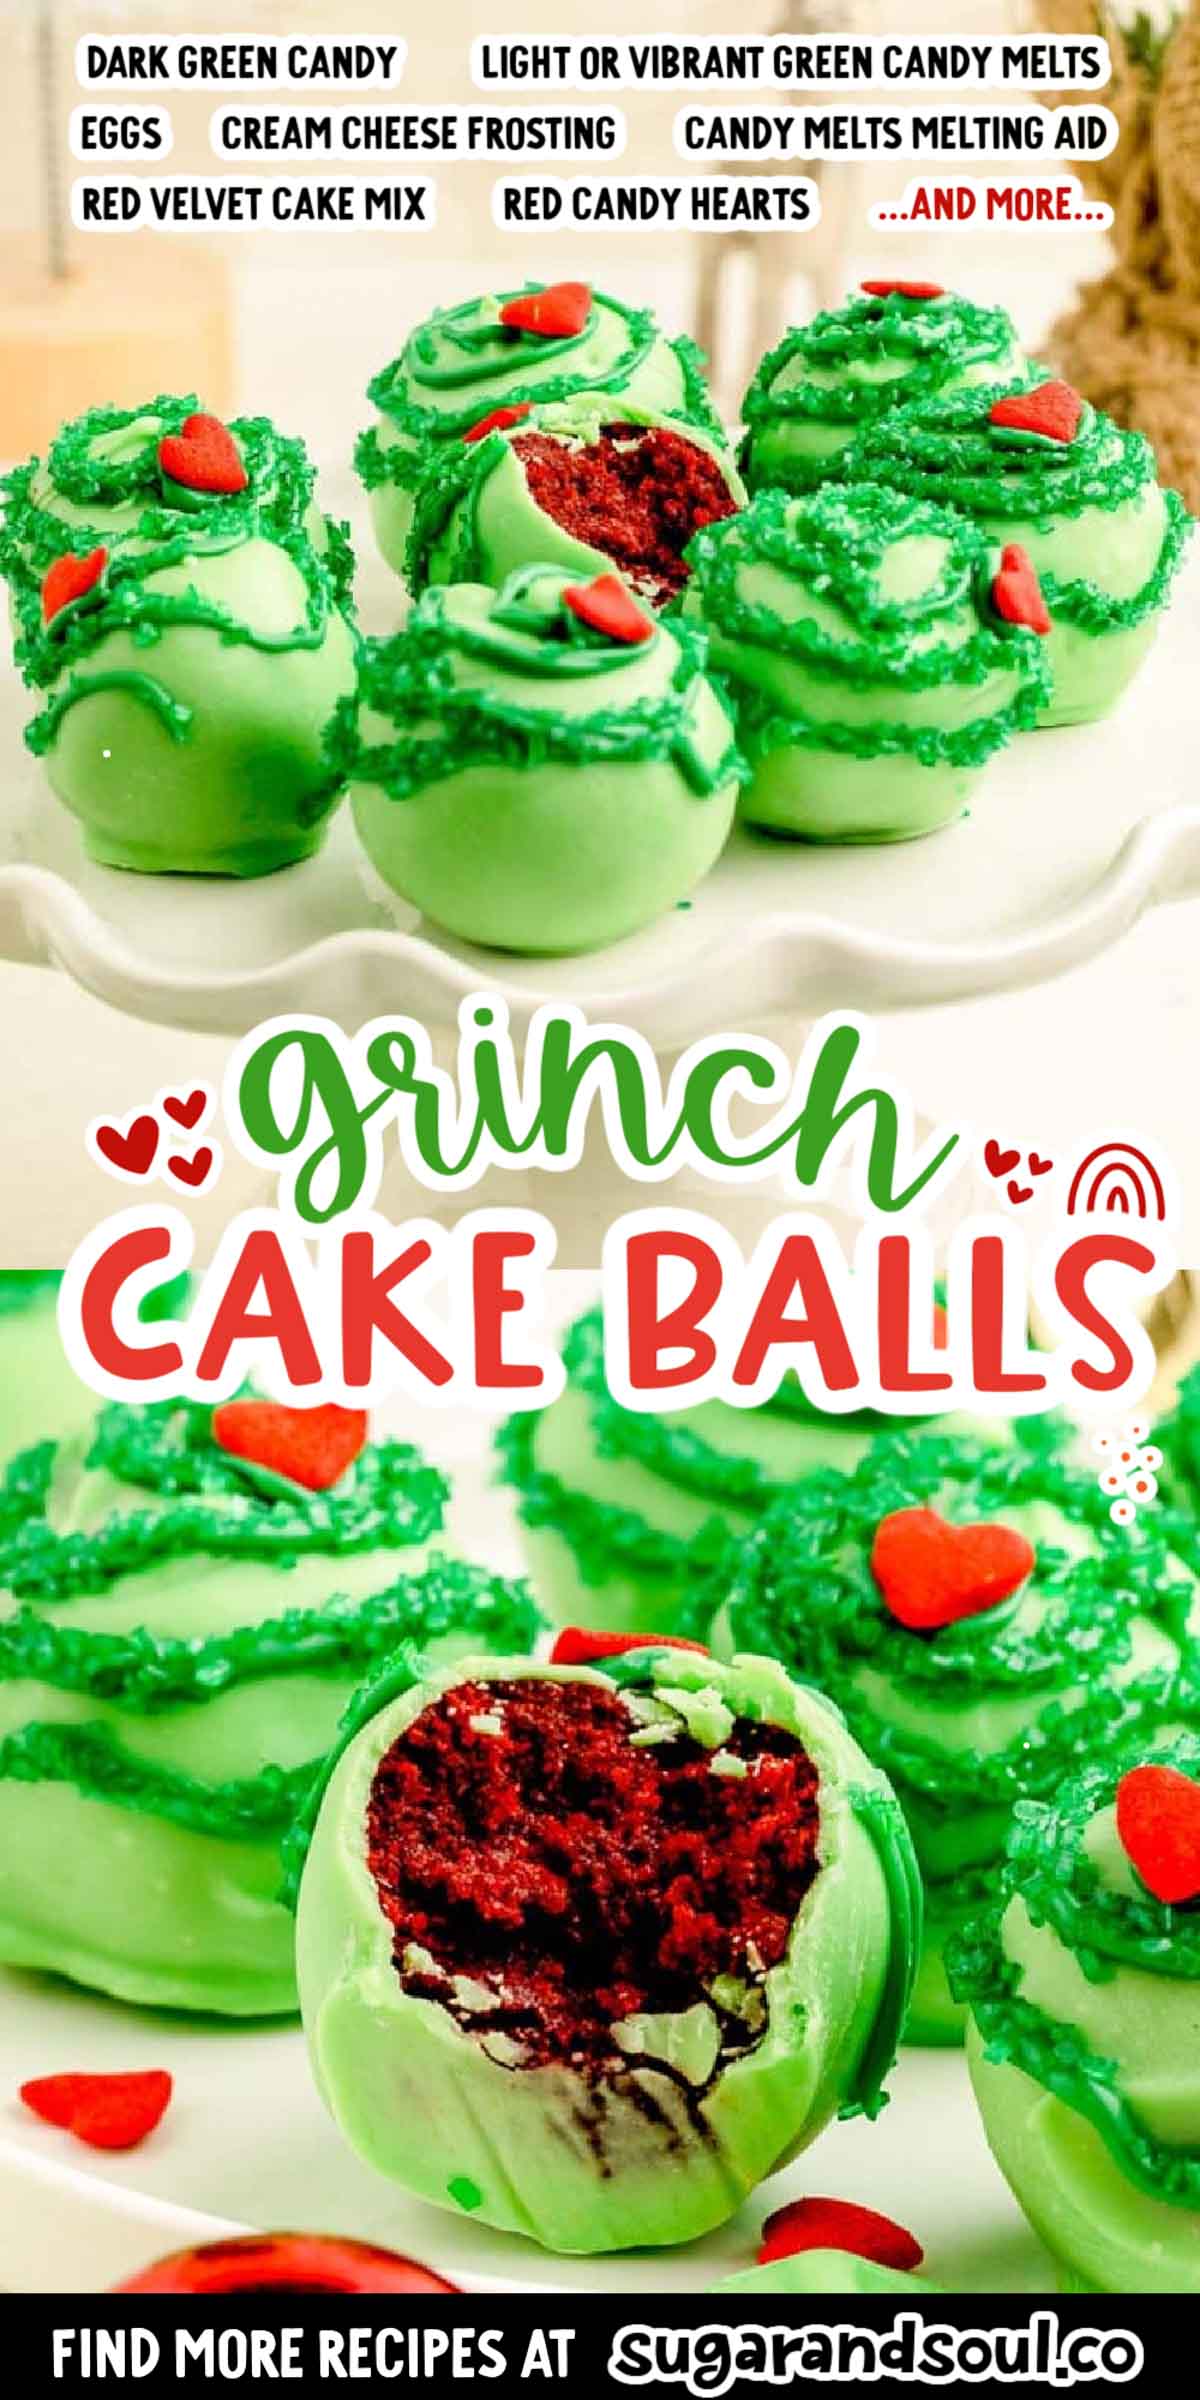 Grinch Cake Balls will make your heart grow three sizes since they're easily made with a boxed cake mix, canned frosting, and candy melts! Makes two dozen cake balls that are perfect for the holidays! via @sugarandsoulco